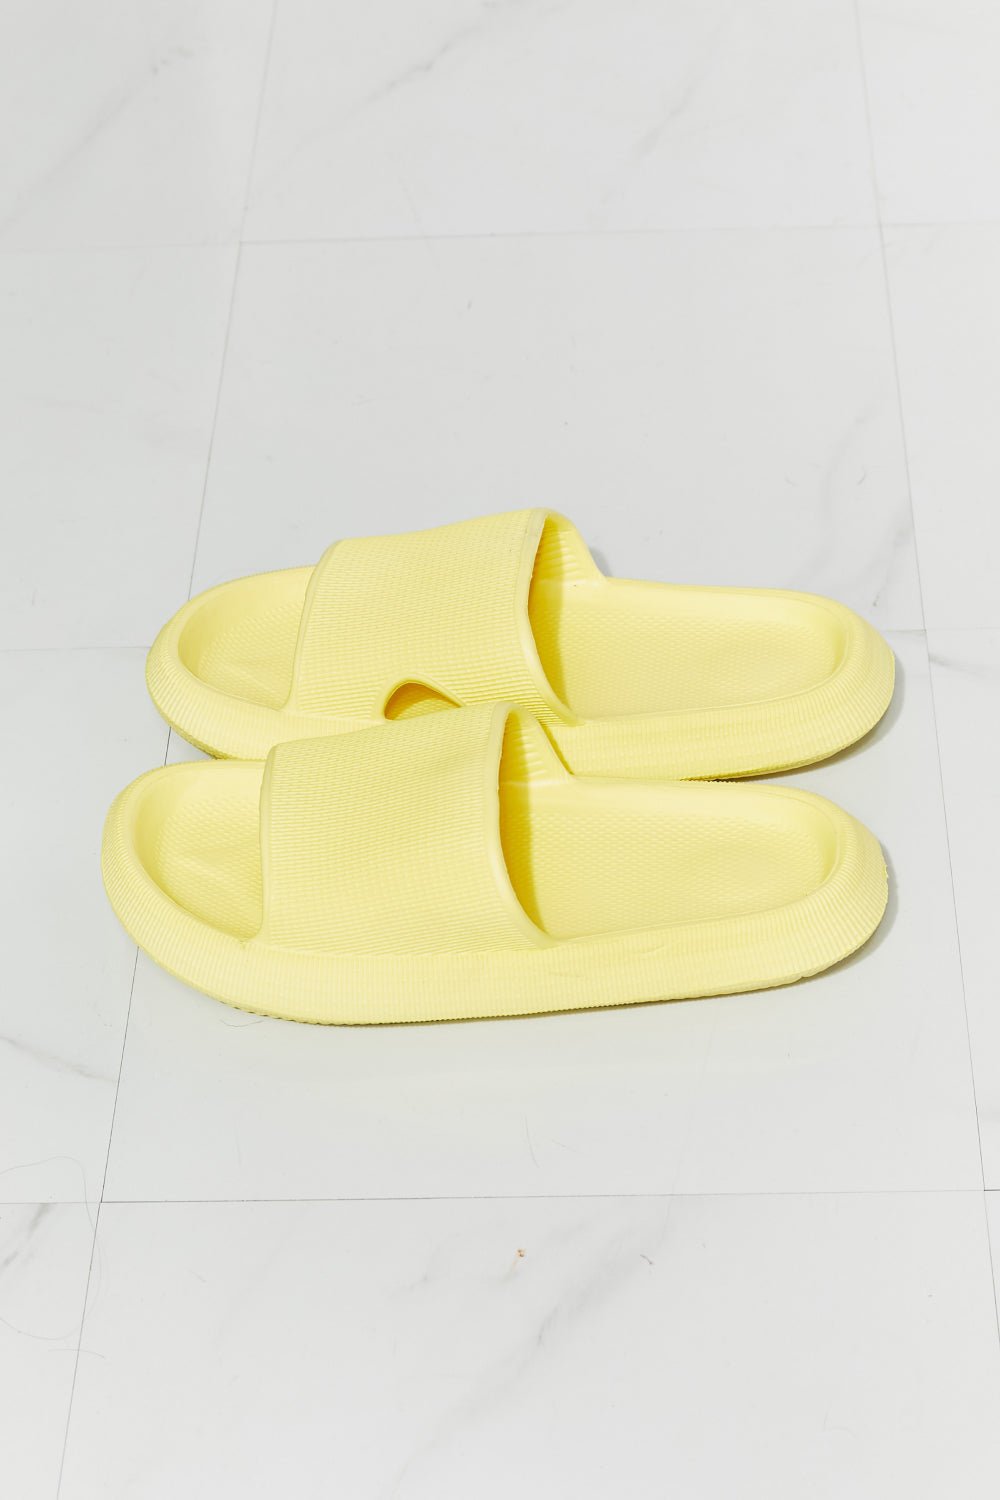 Open Toe Rubber Slide Sandals in Canary YellowSlidesMelody